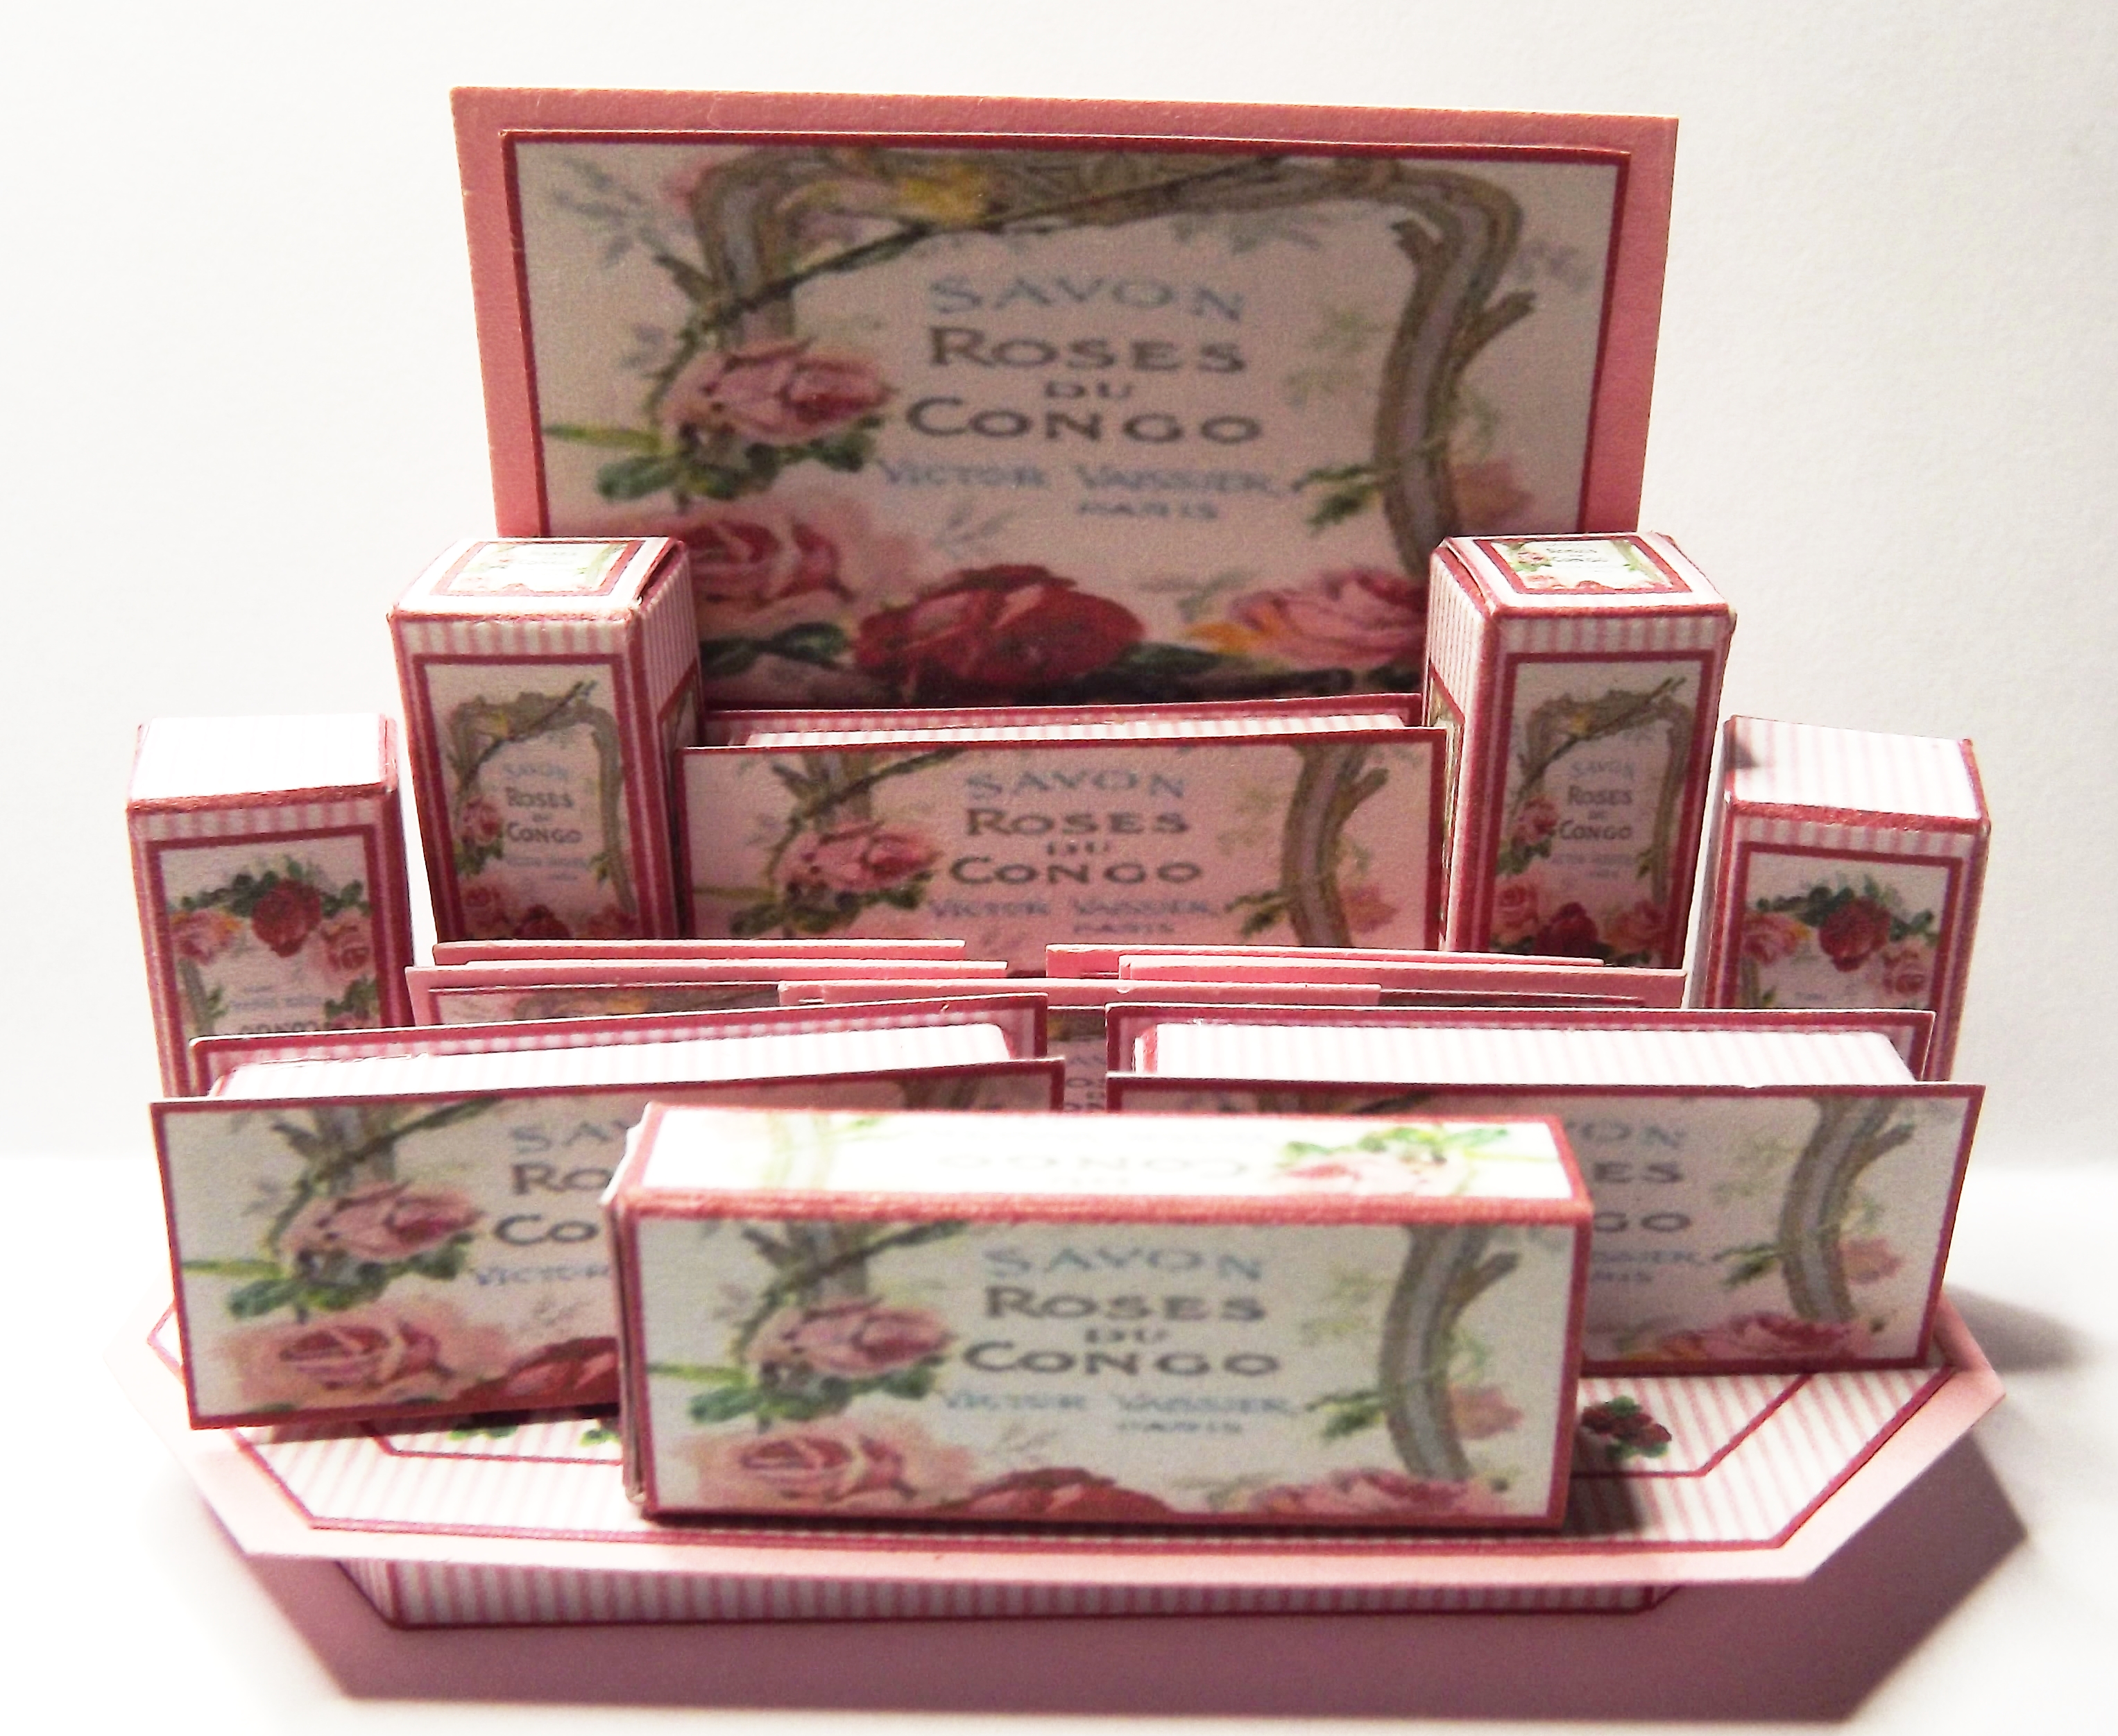 ROSES DE CONGO TOILETRY STAND DISPLAY DOWNLOAD - Click Image to Close